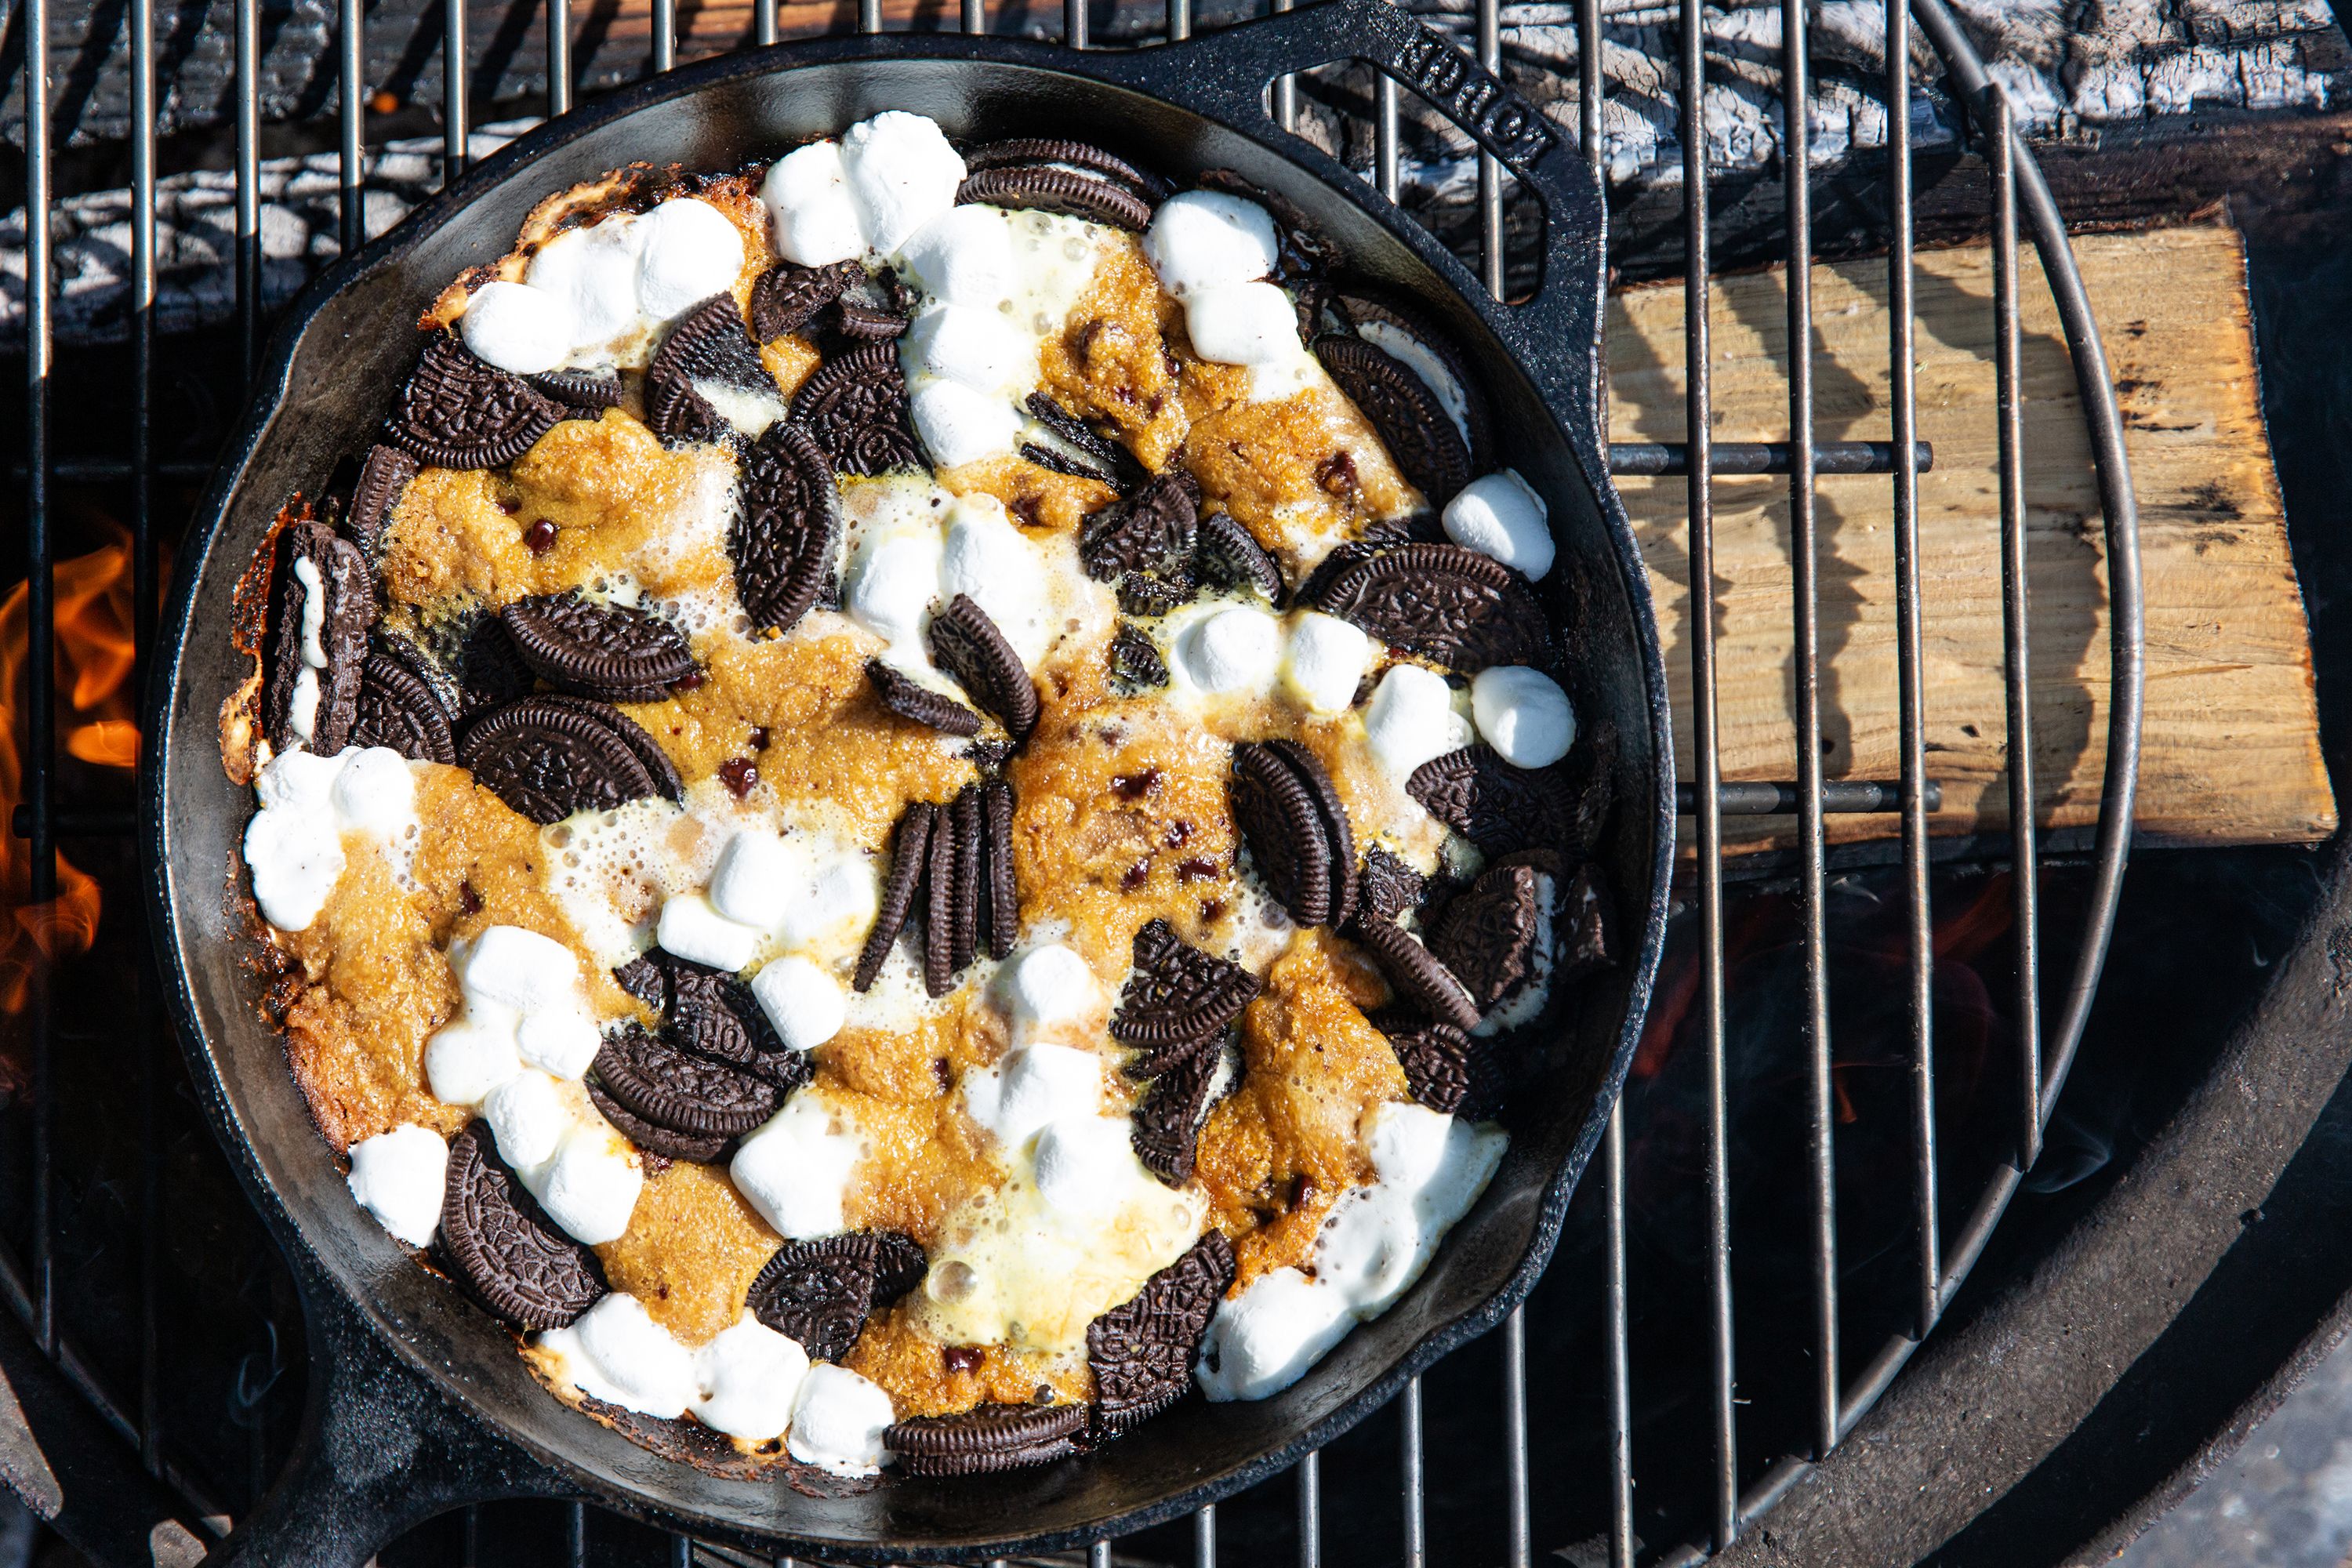 10 Delicious Cast Iron Skillet Recipes To Make Your Camping Trip Wonderful  - DIY & Crafts